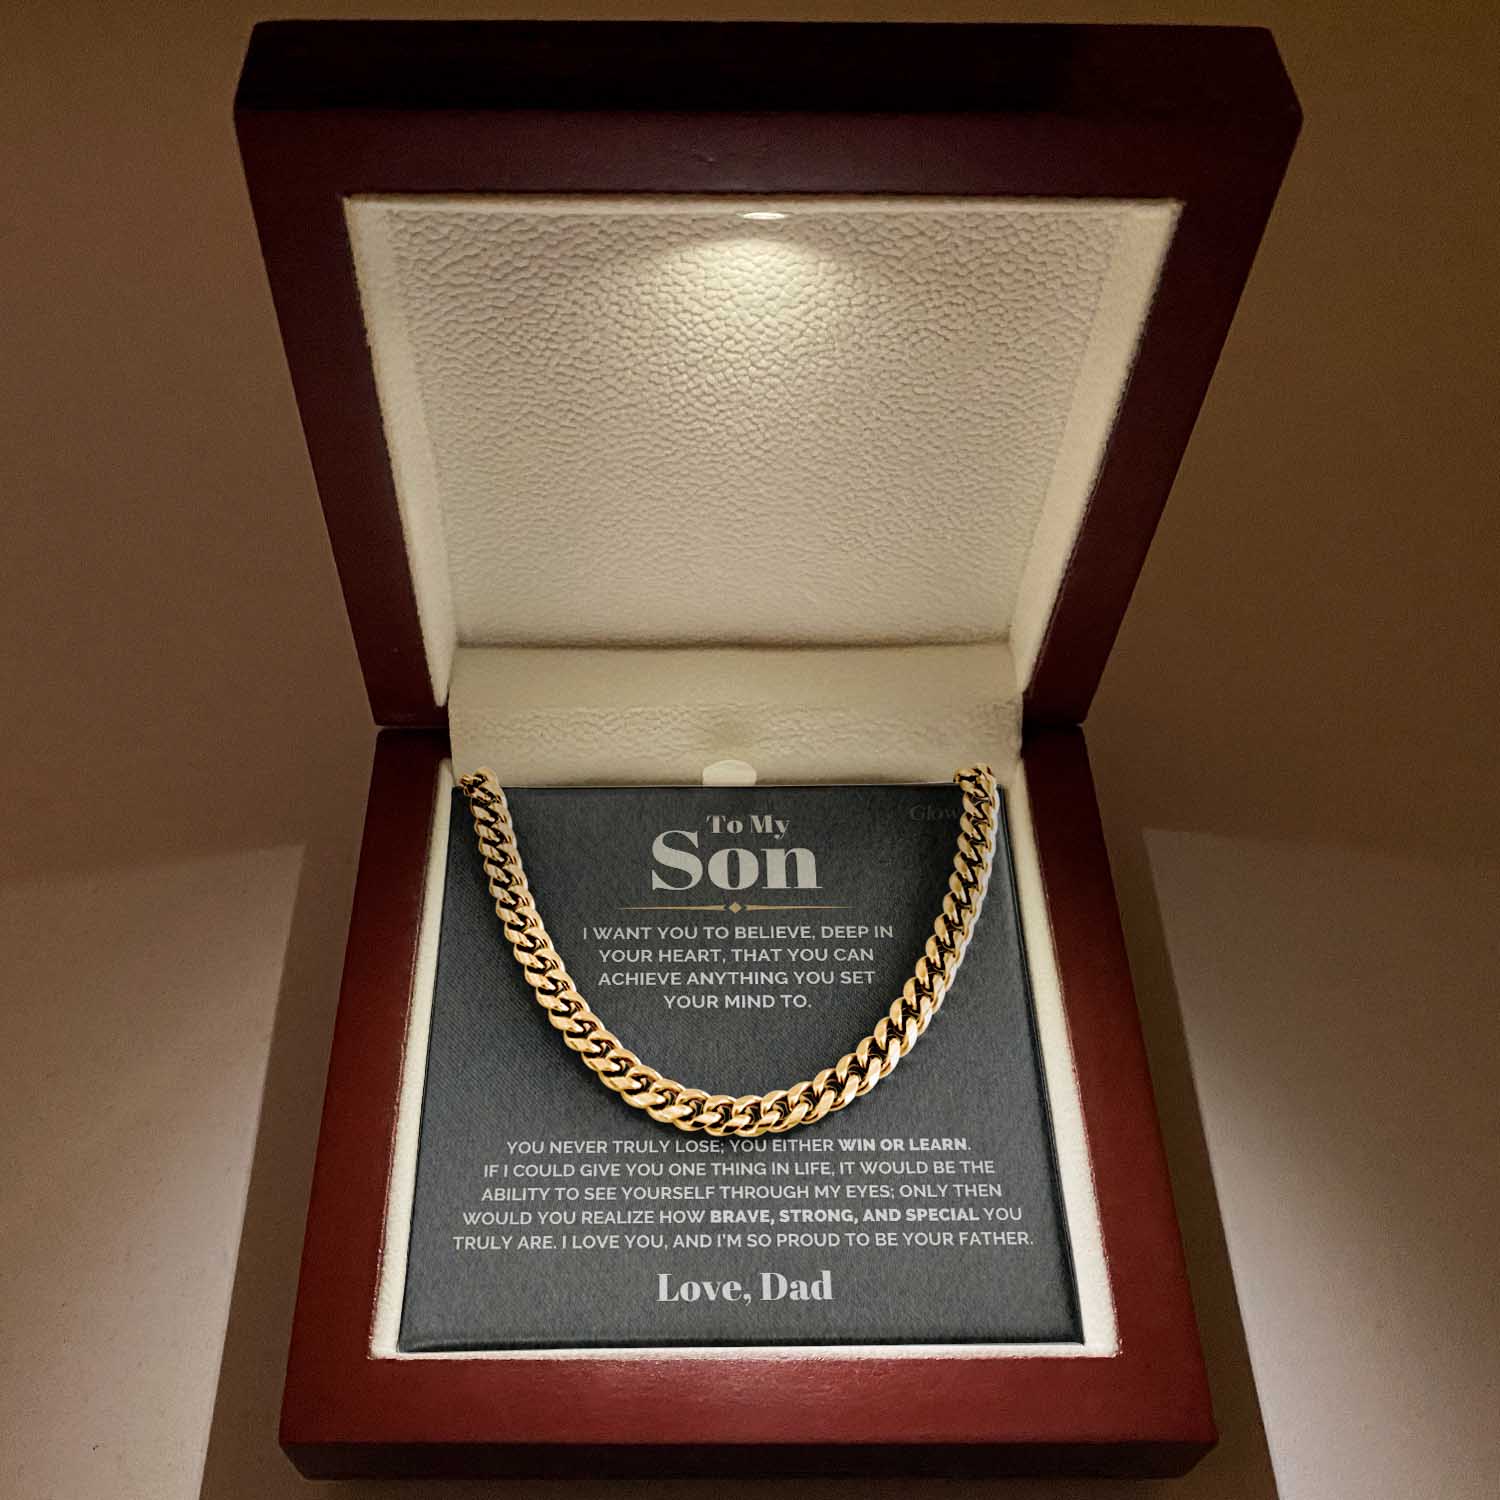 ShineOn Fulfillment Cuban Link Chain 14K Yellow Gold Finish / Luxury Box Proud to be your Father Cuban Chain Necklace | Strengthen Dad-Son Bond